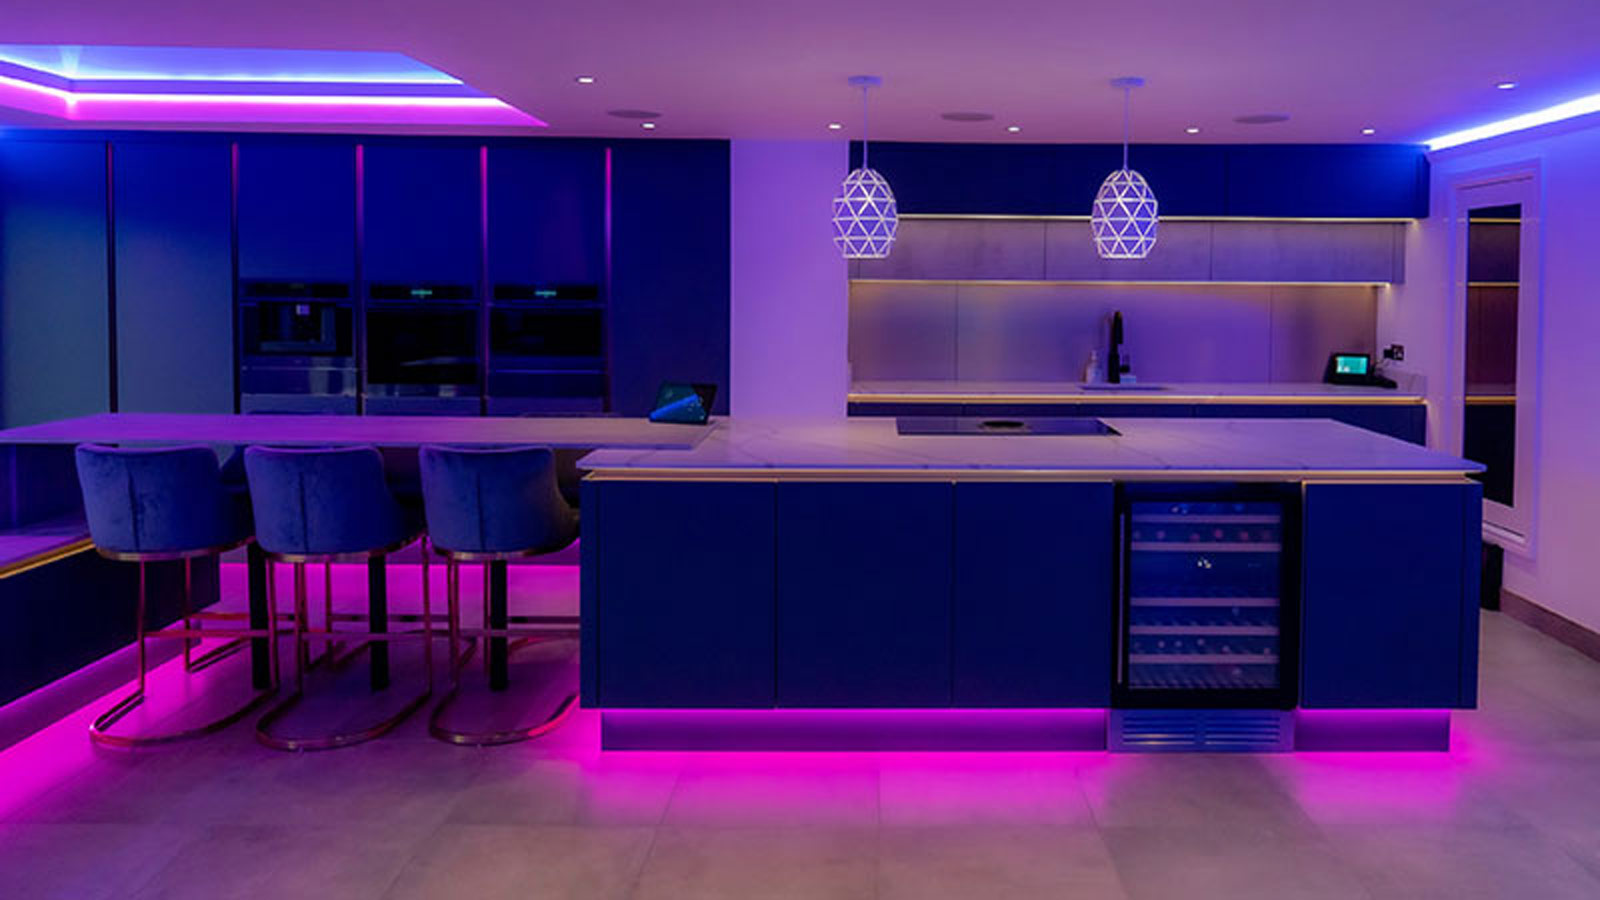 Home bar area with a wine fridge in a modern luxury kitchen